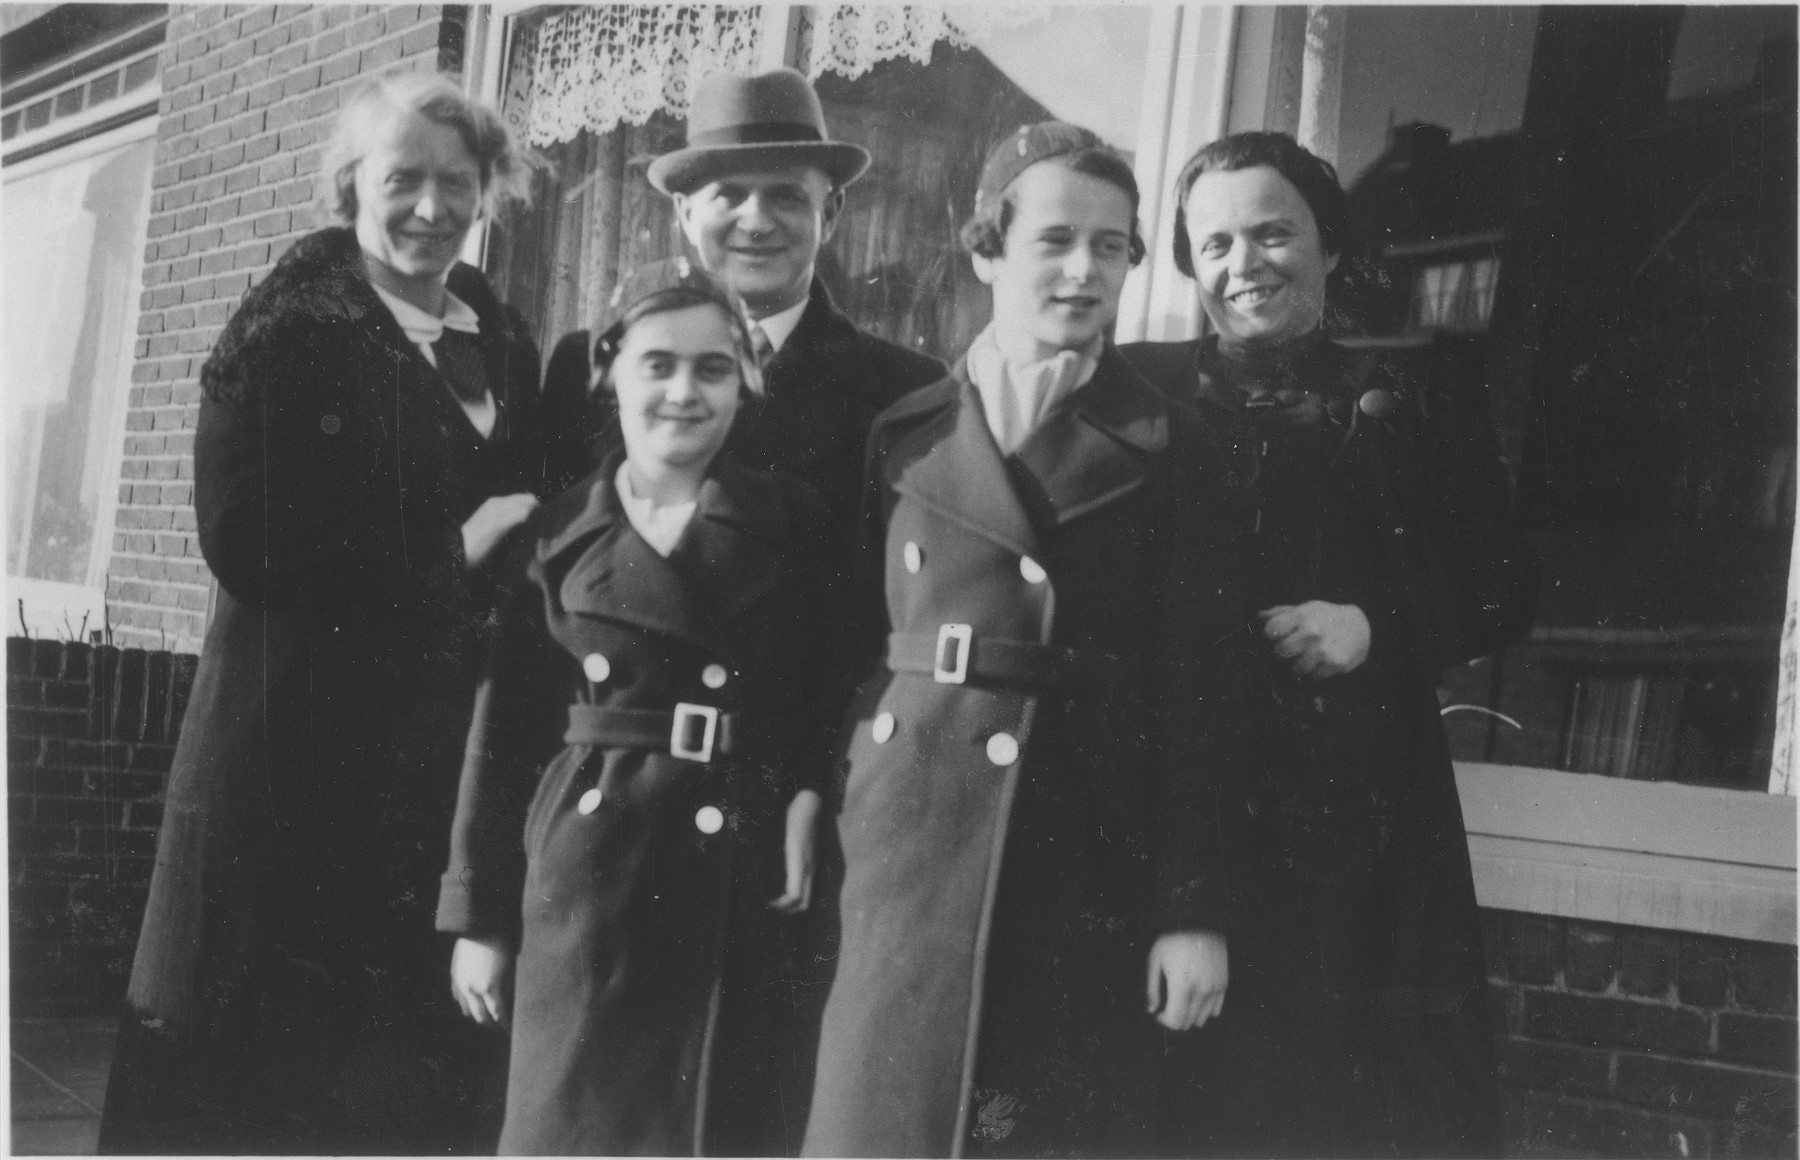 Portrait of the Bloch family in front of a house in Zandvoort.

Pictured from left to right are Ilse, Doris, Richard and Gerda Bloch and Marion (Cats) Hollander (Ilse's sister).